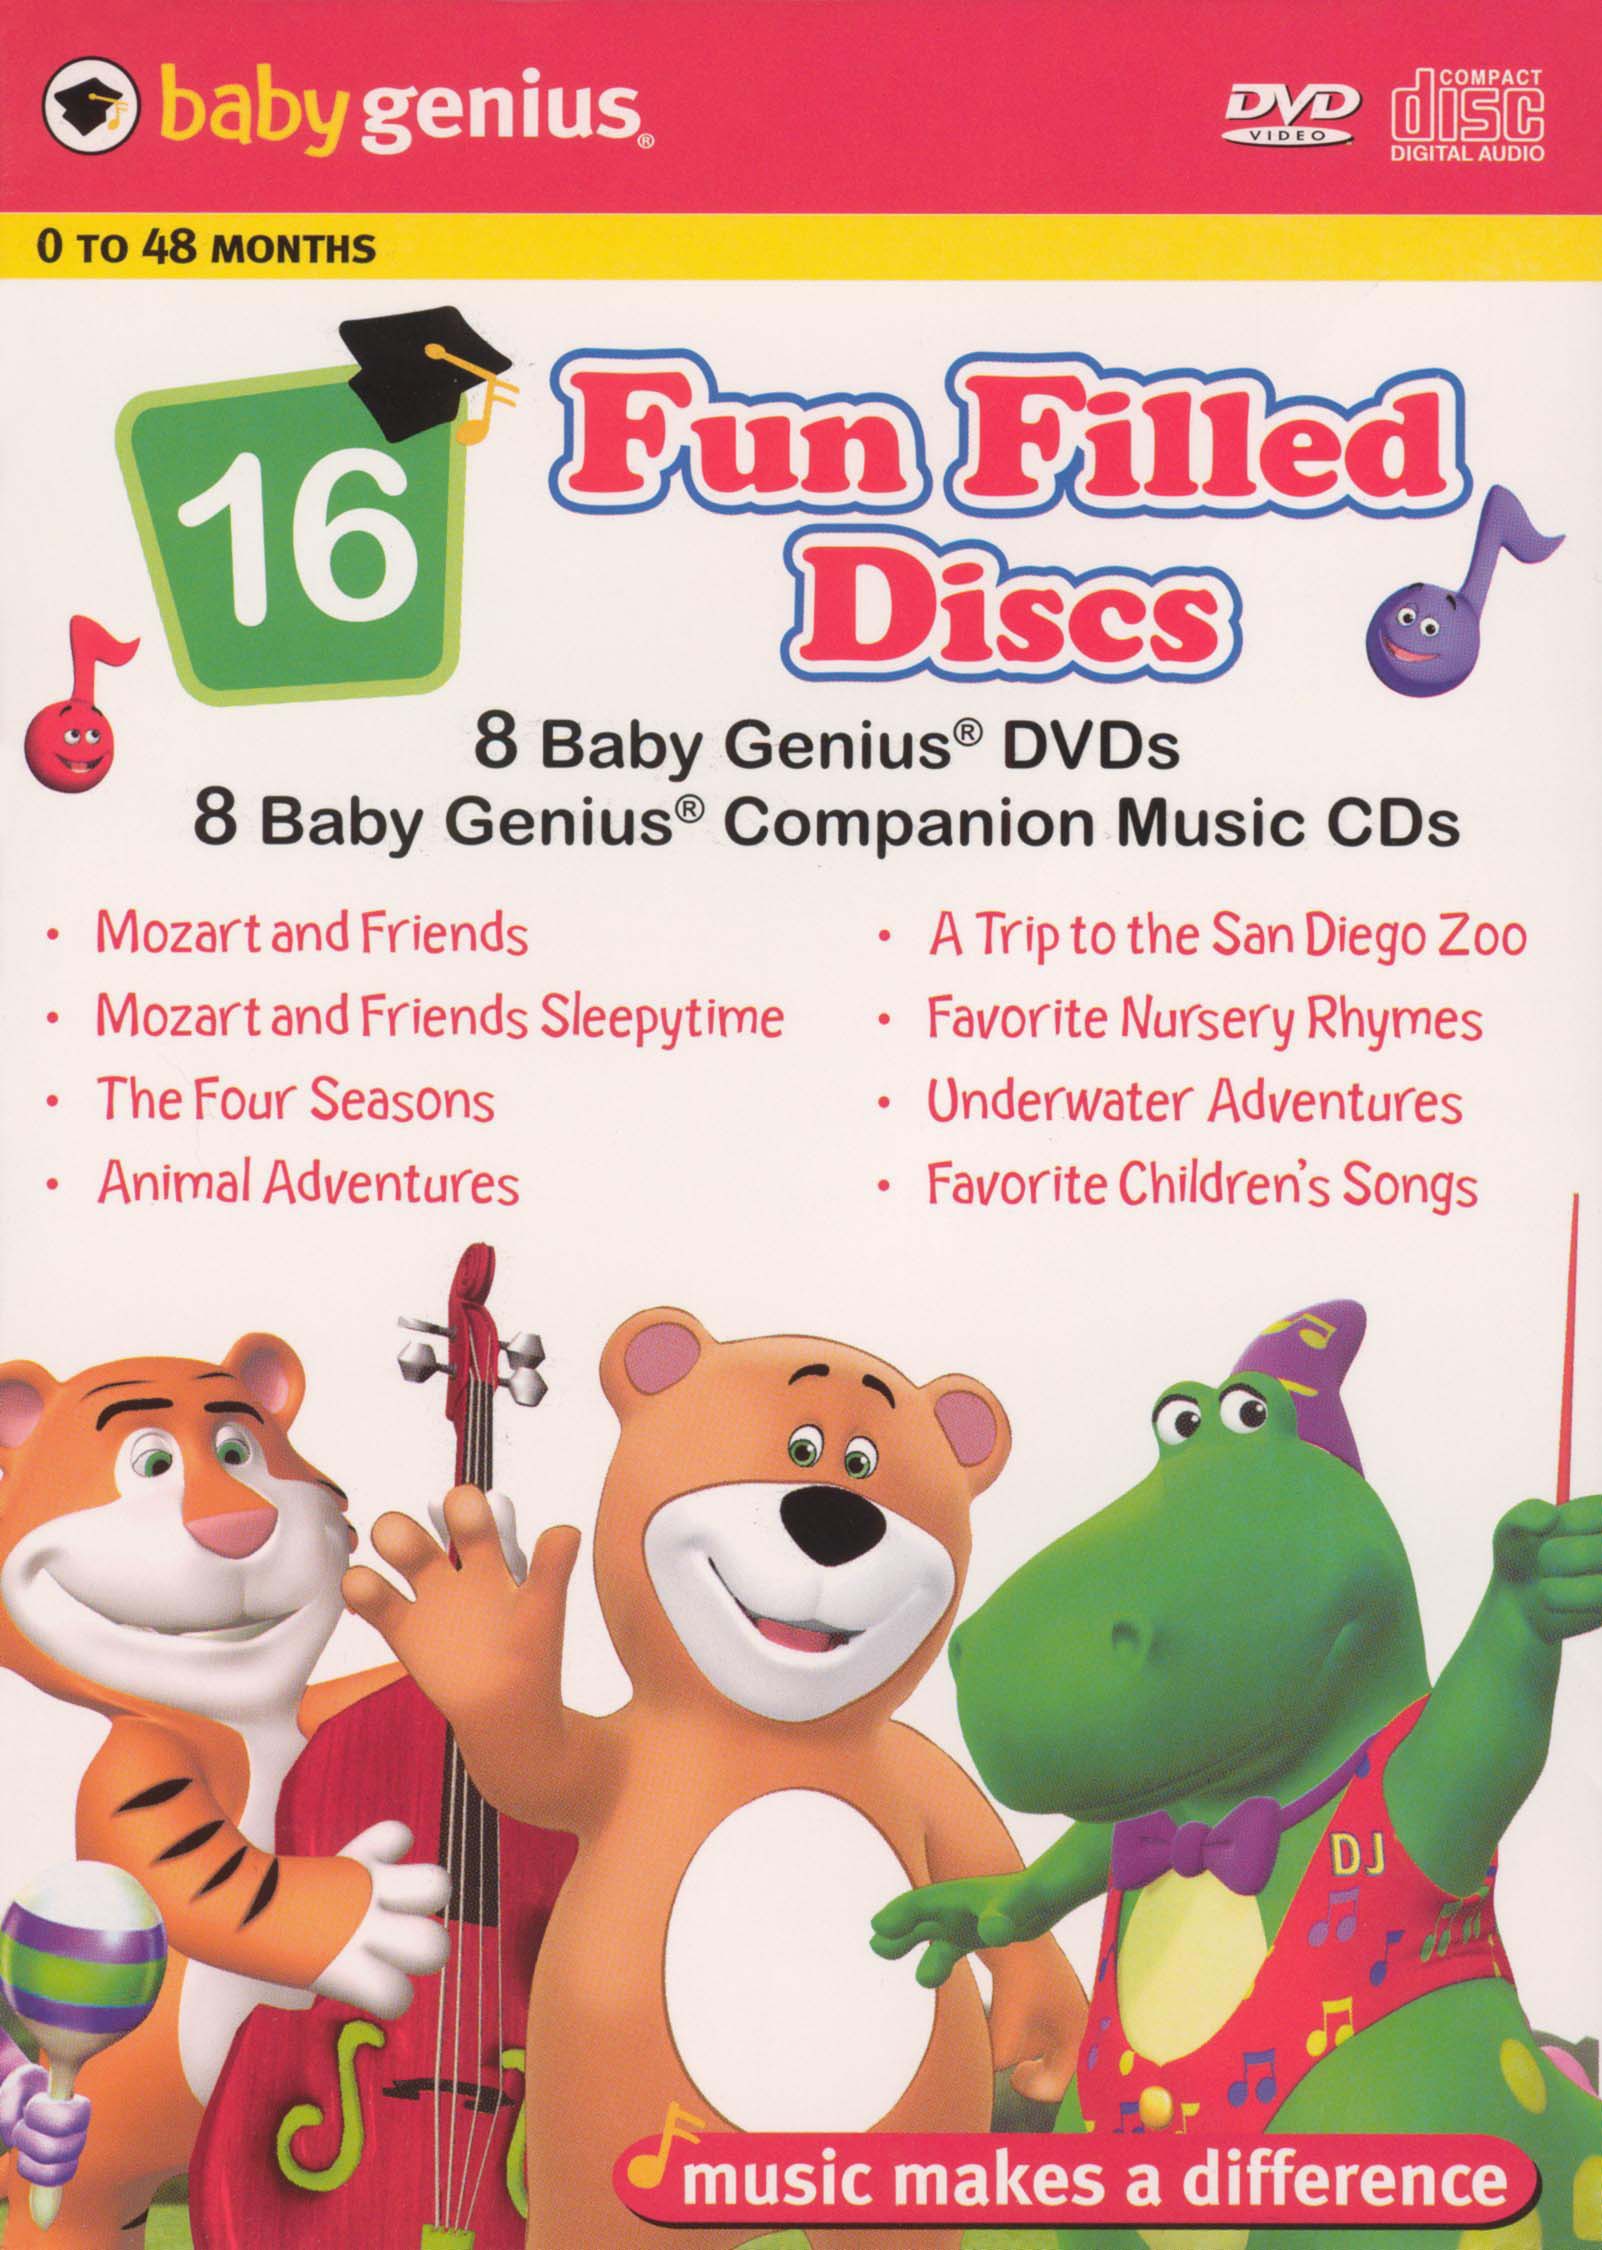 New Baby Genius 0 -36 Months Dvd Outlets Shop, 46% OFF |  mail.esemontenegro.gov.co